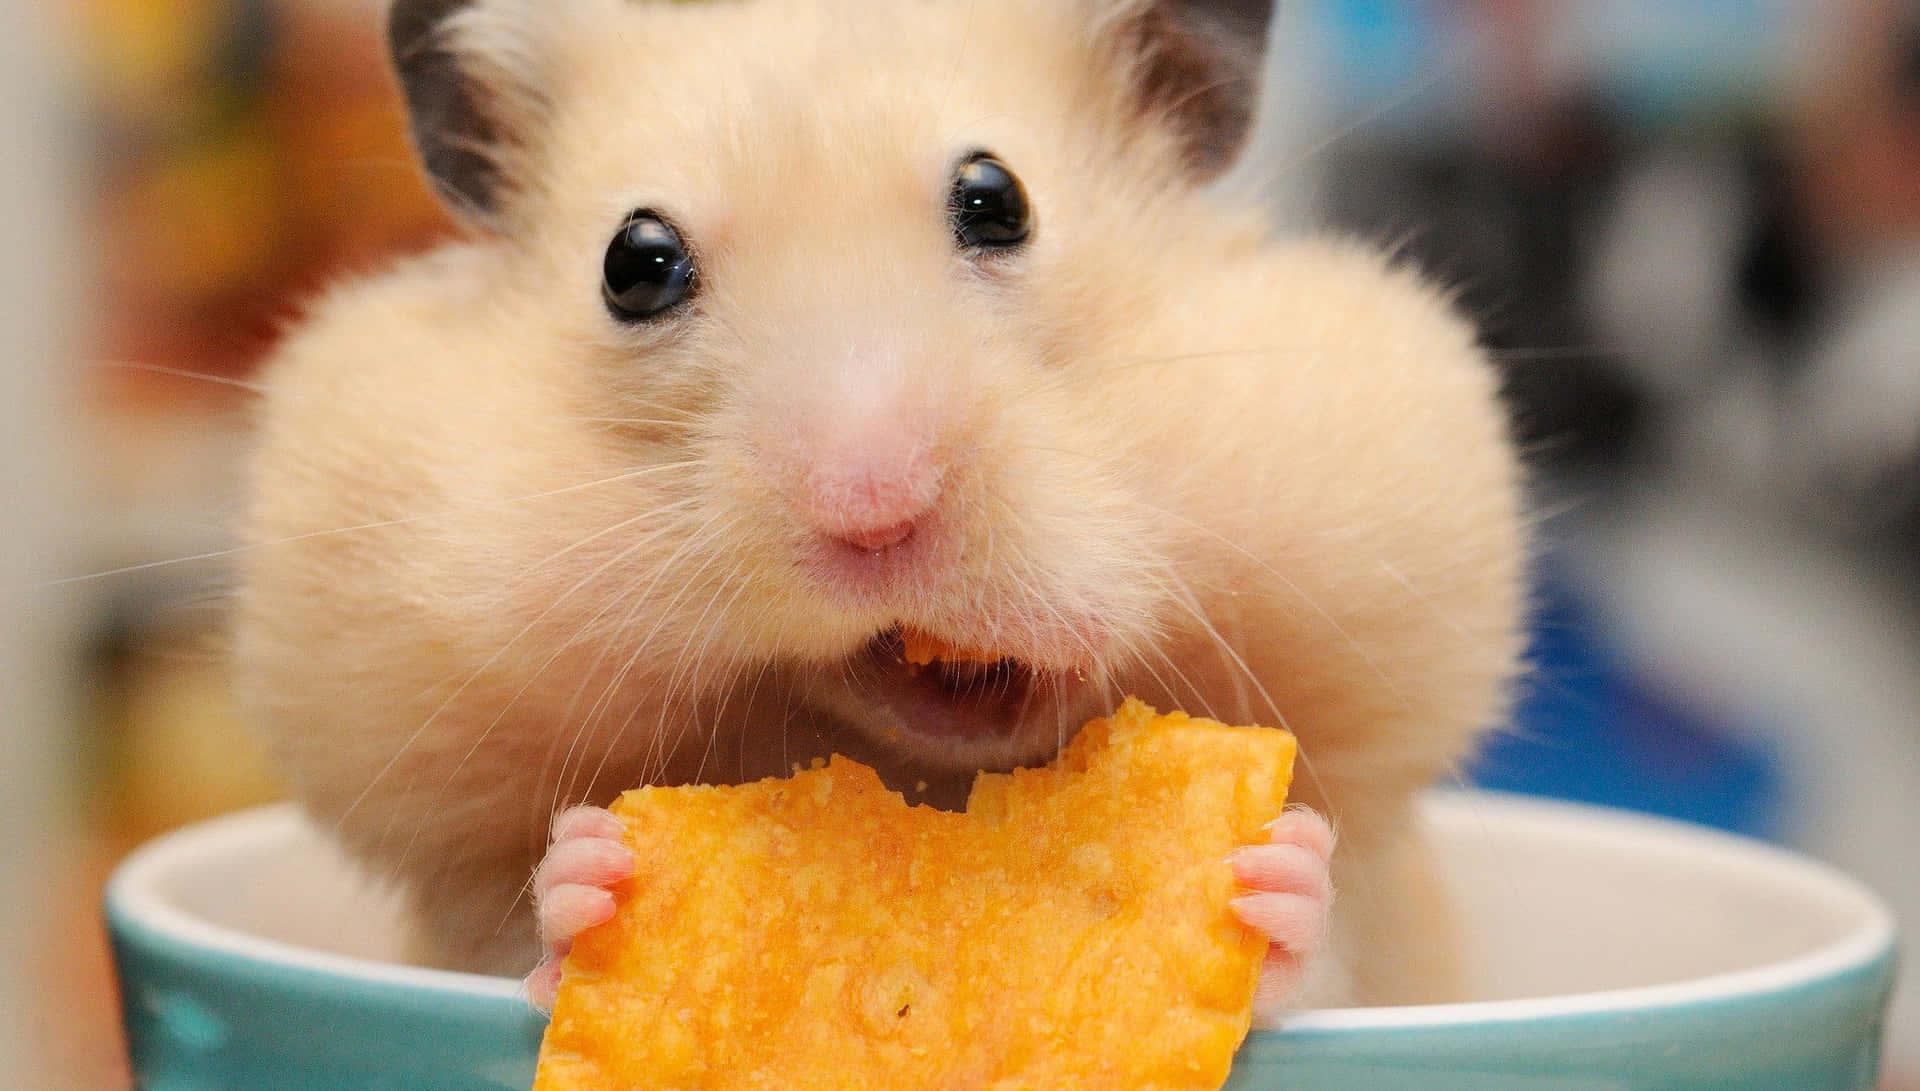 Download Adorable Hamster Watching With Curiosity Wallpaper